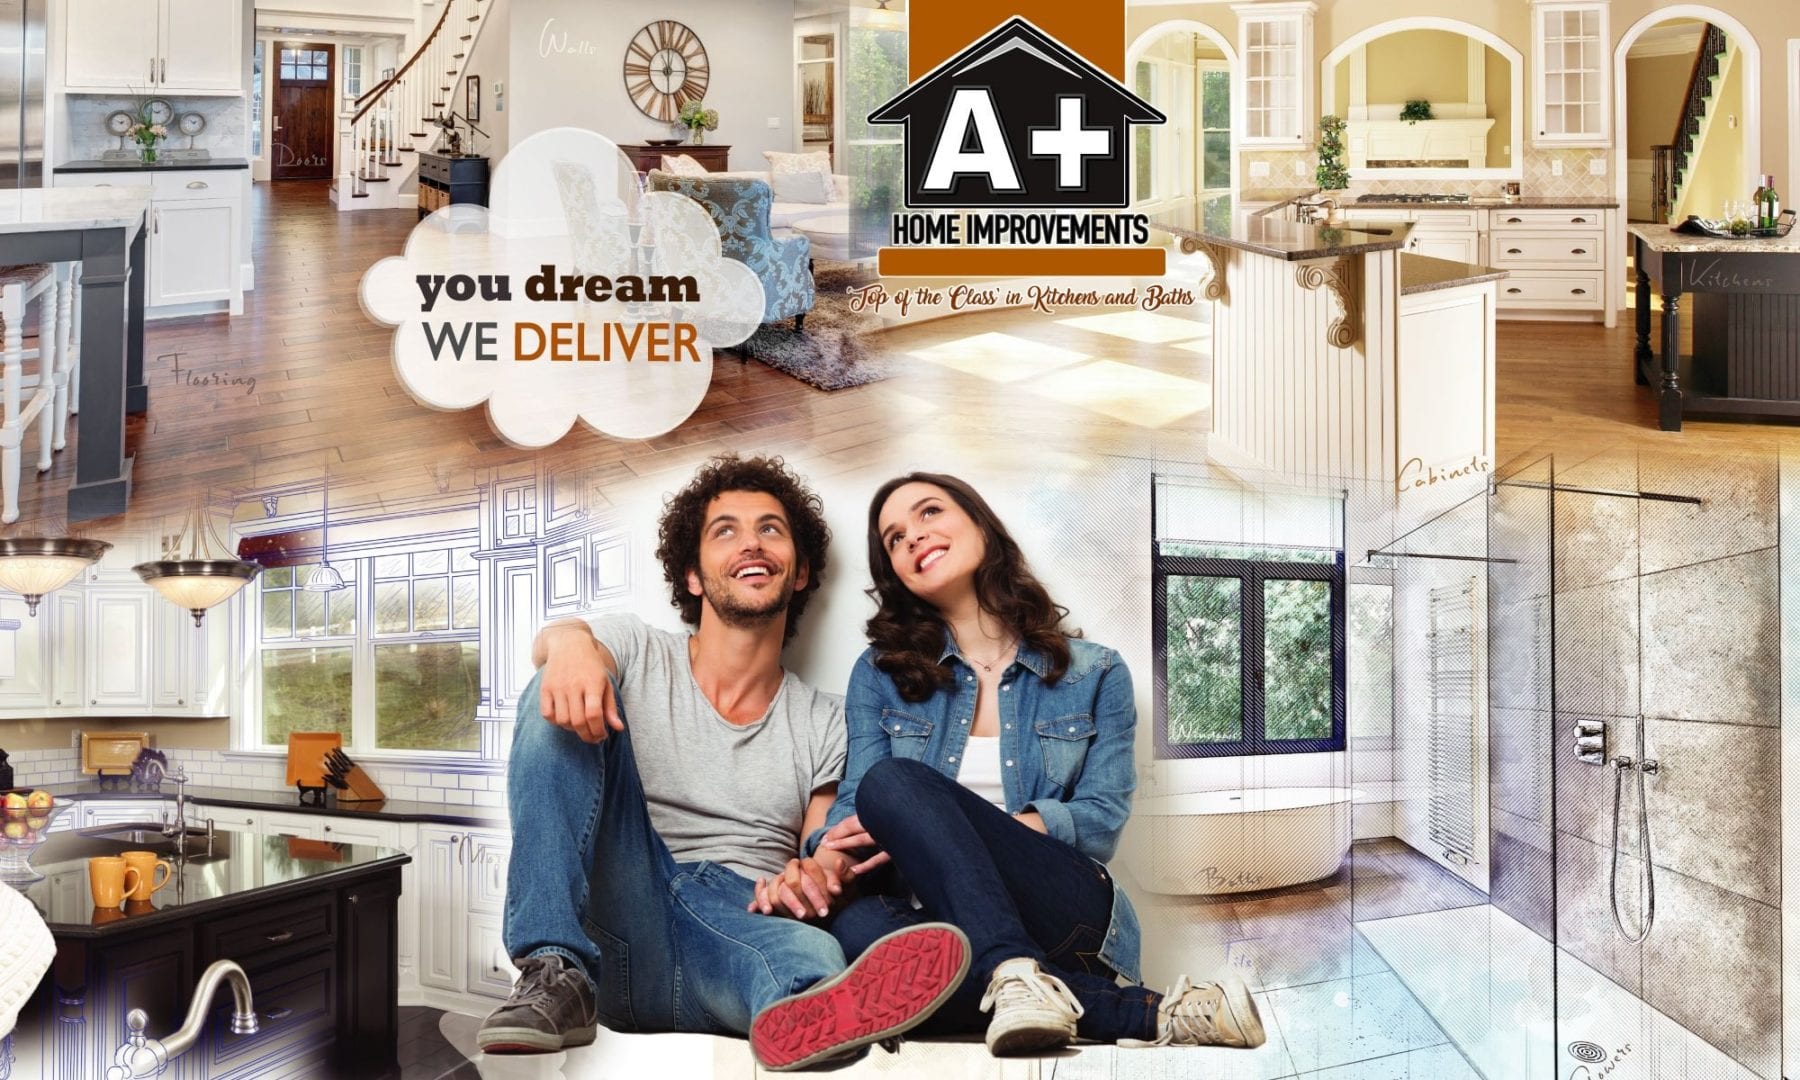 Remodeler in Toledo, Ohio - A+ Home Improvements - Toledo's Top Choice for Kitchen and Bath Remodeling